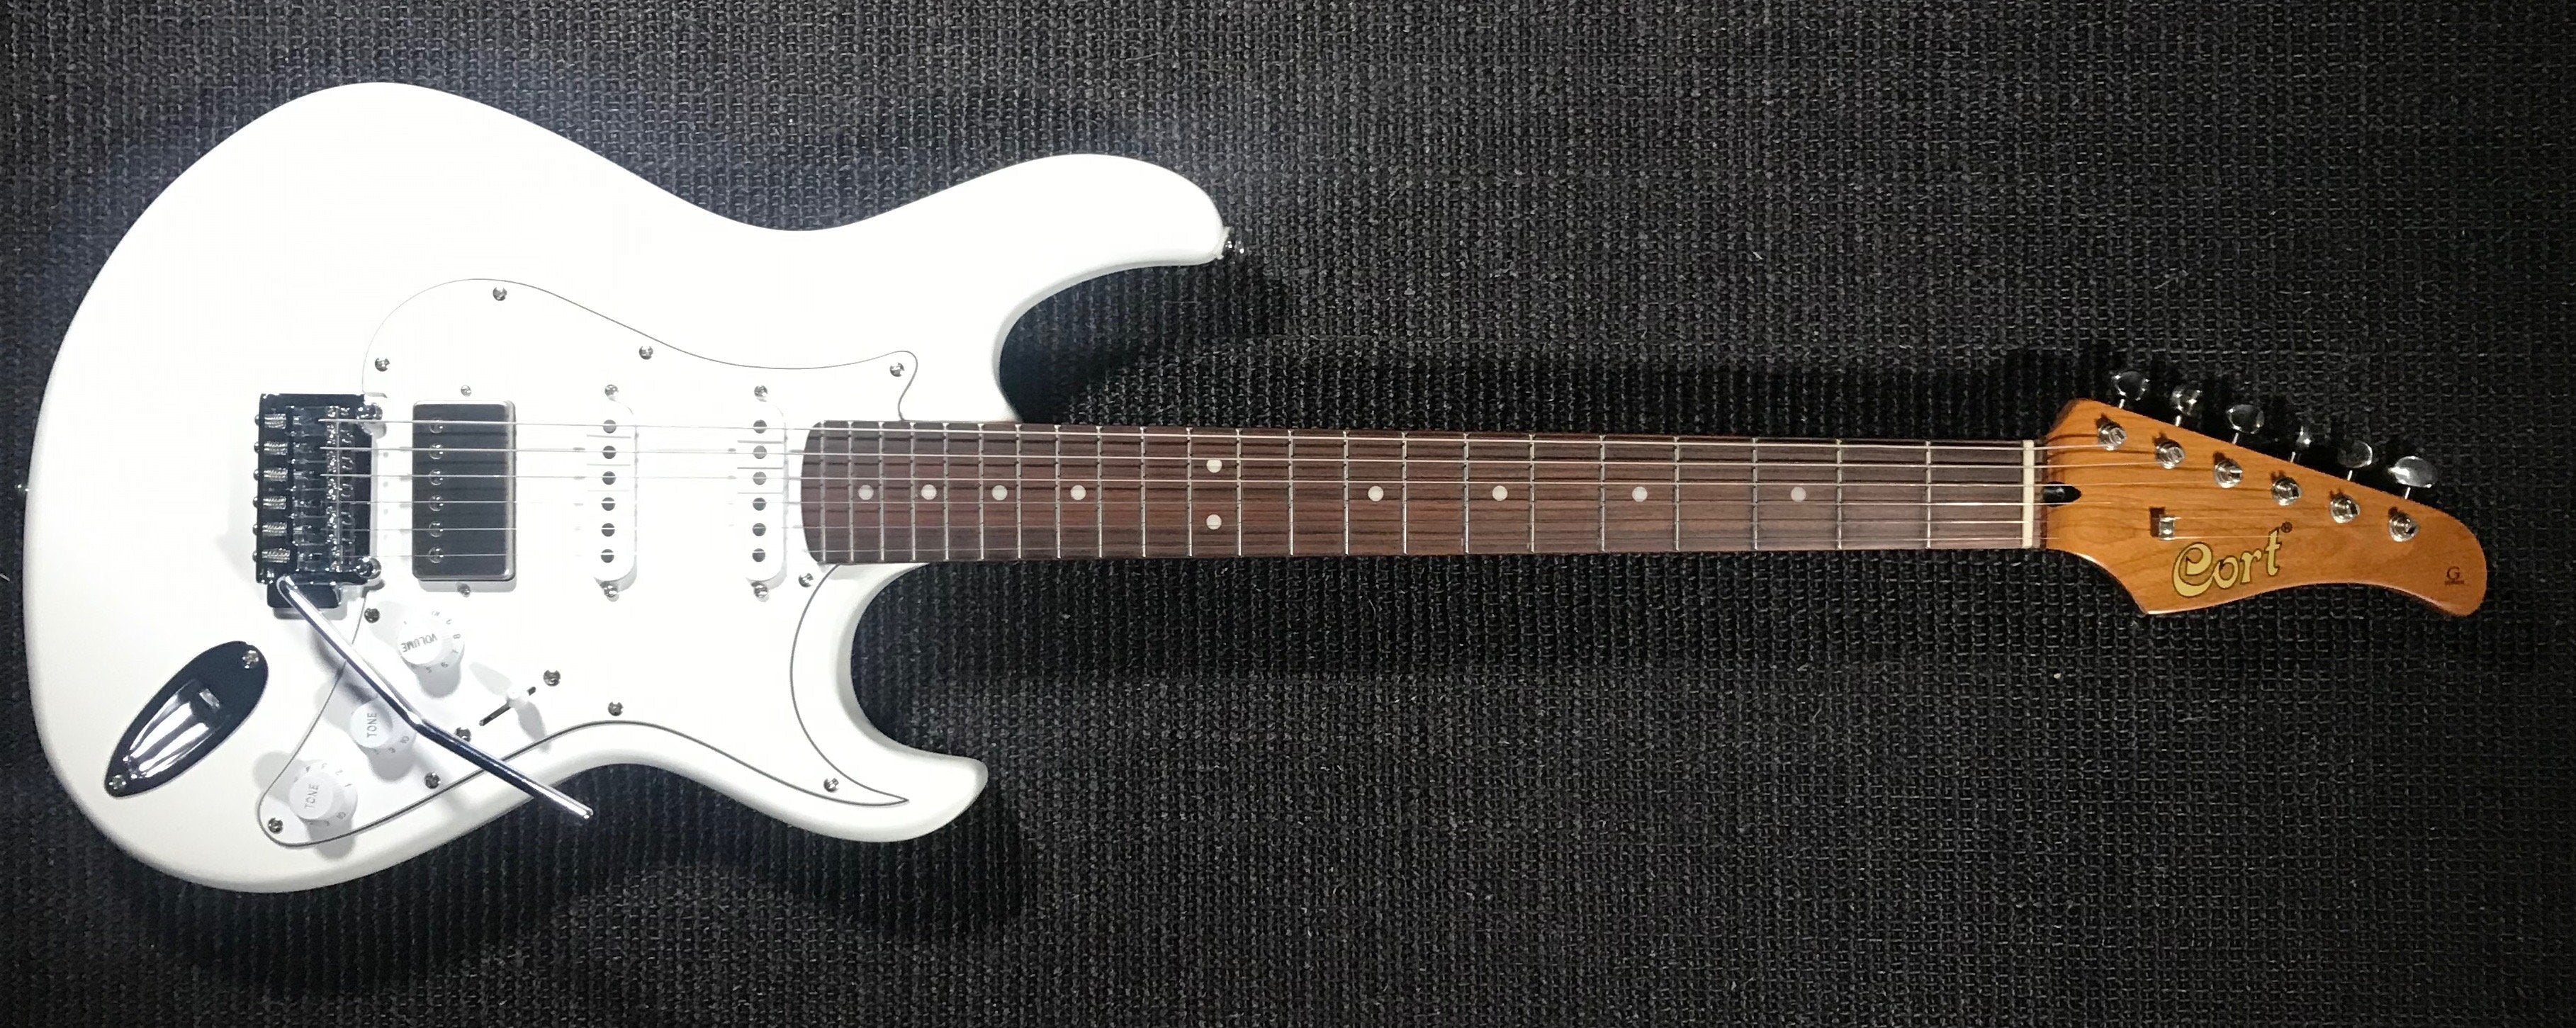 Cort G260CS Olympic White, Electric Guitar for sale at Richards Guitars.